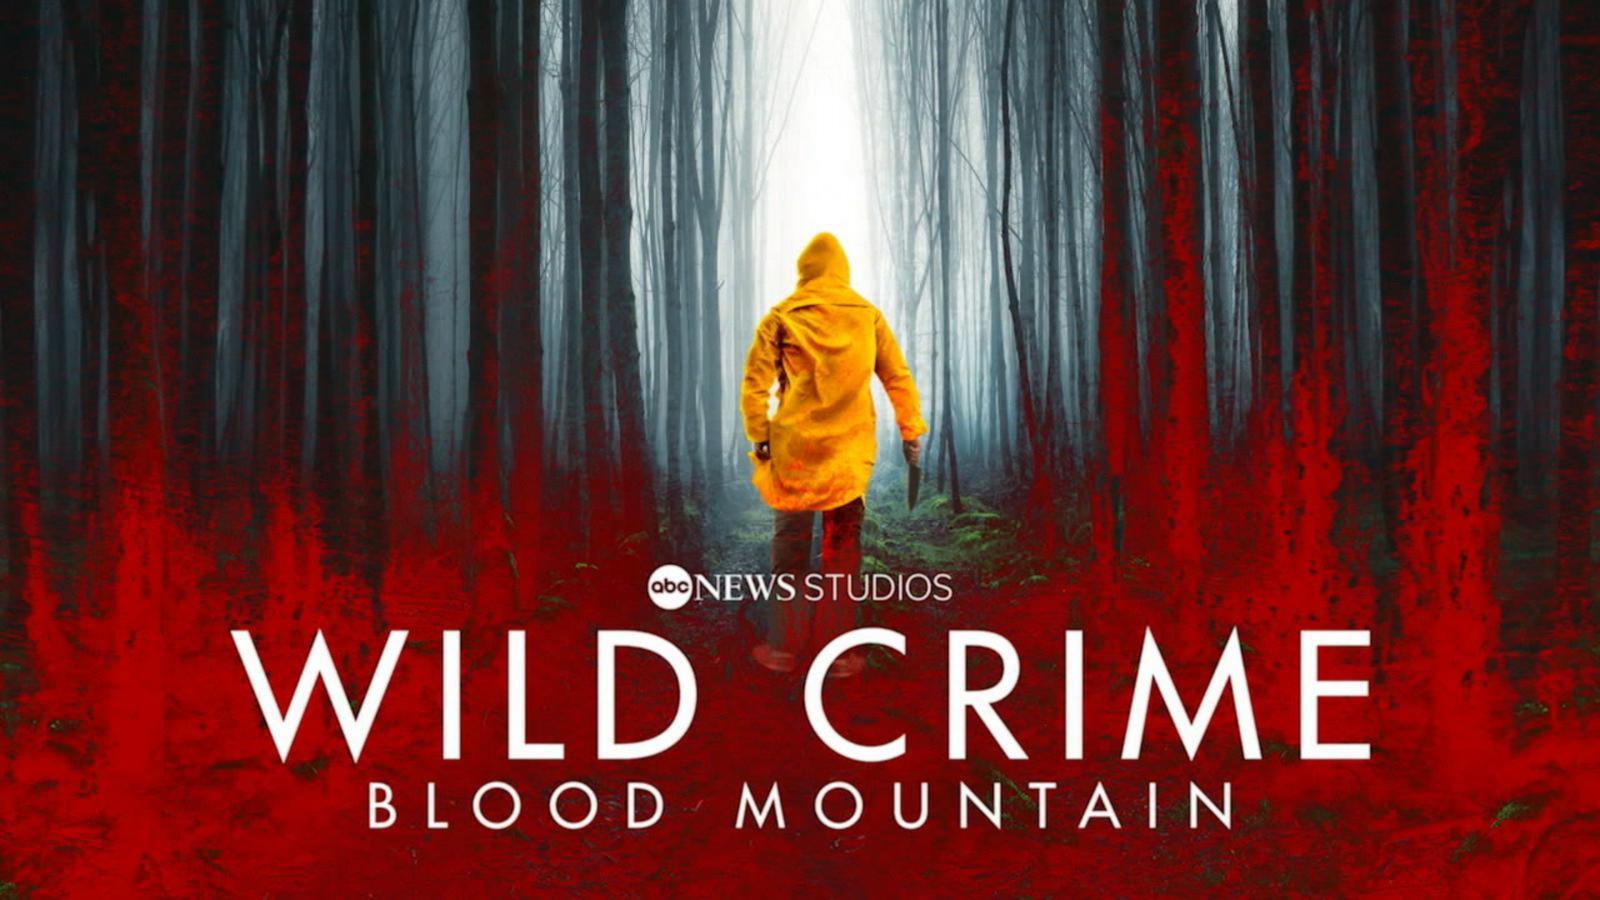 A look at new season of 'Wild Crime' - Good Morning America